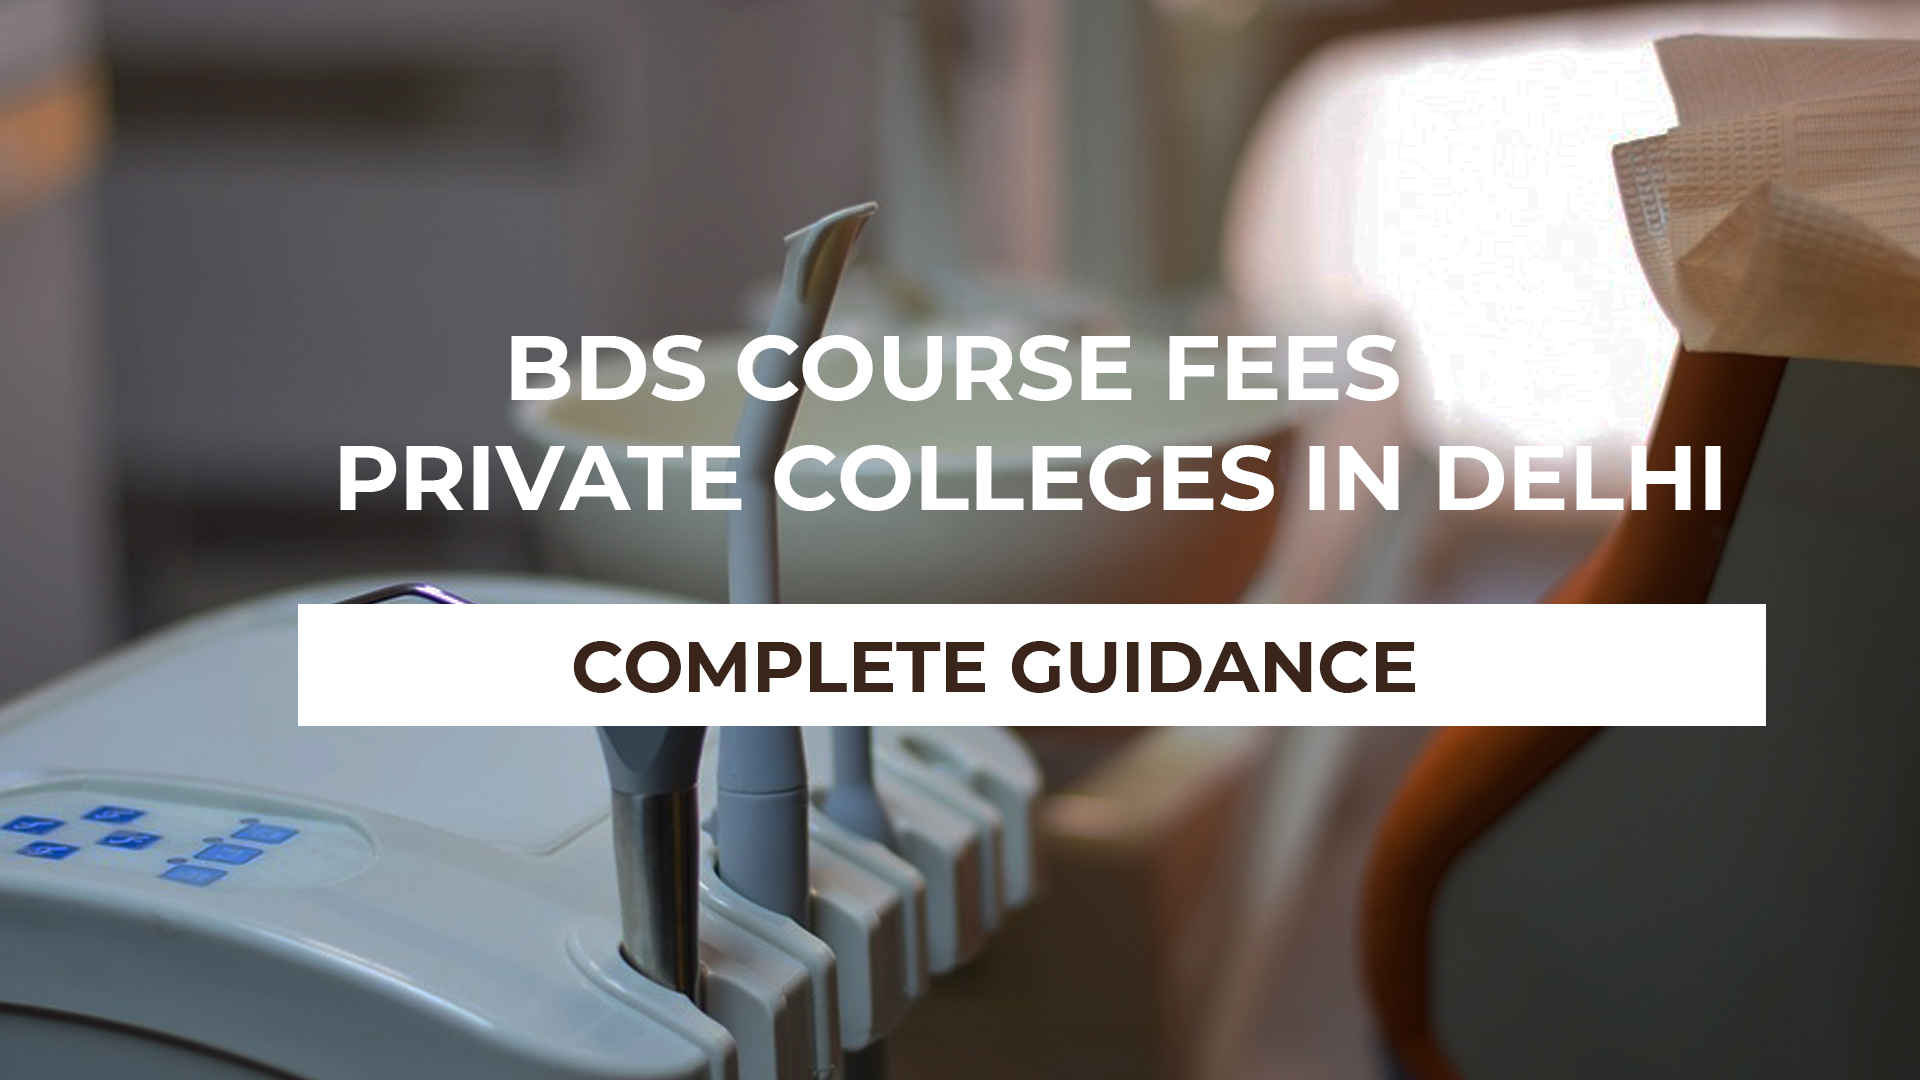 BDS Course fees in Delhi Private Colleges